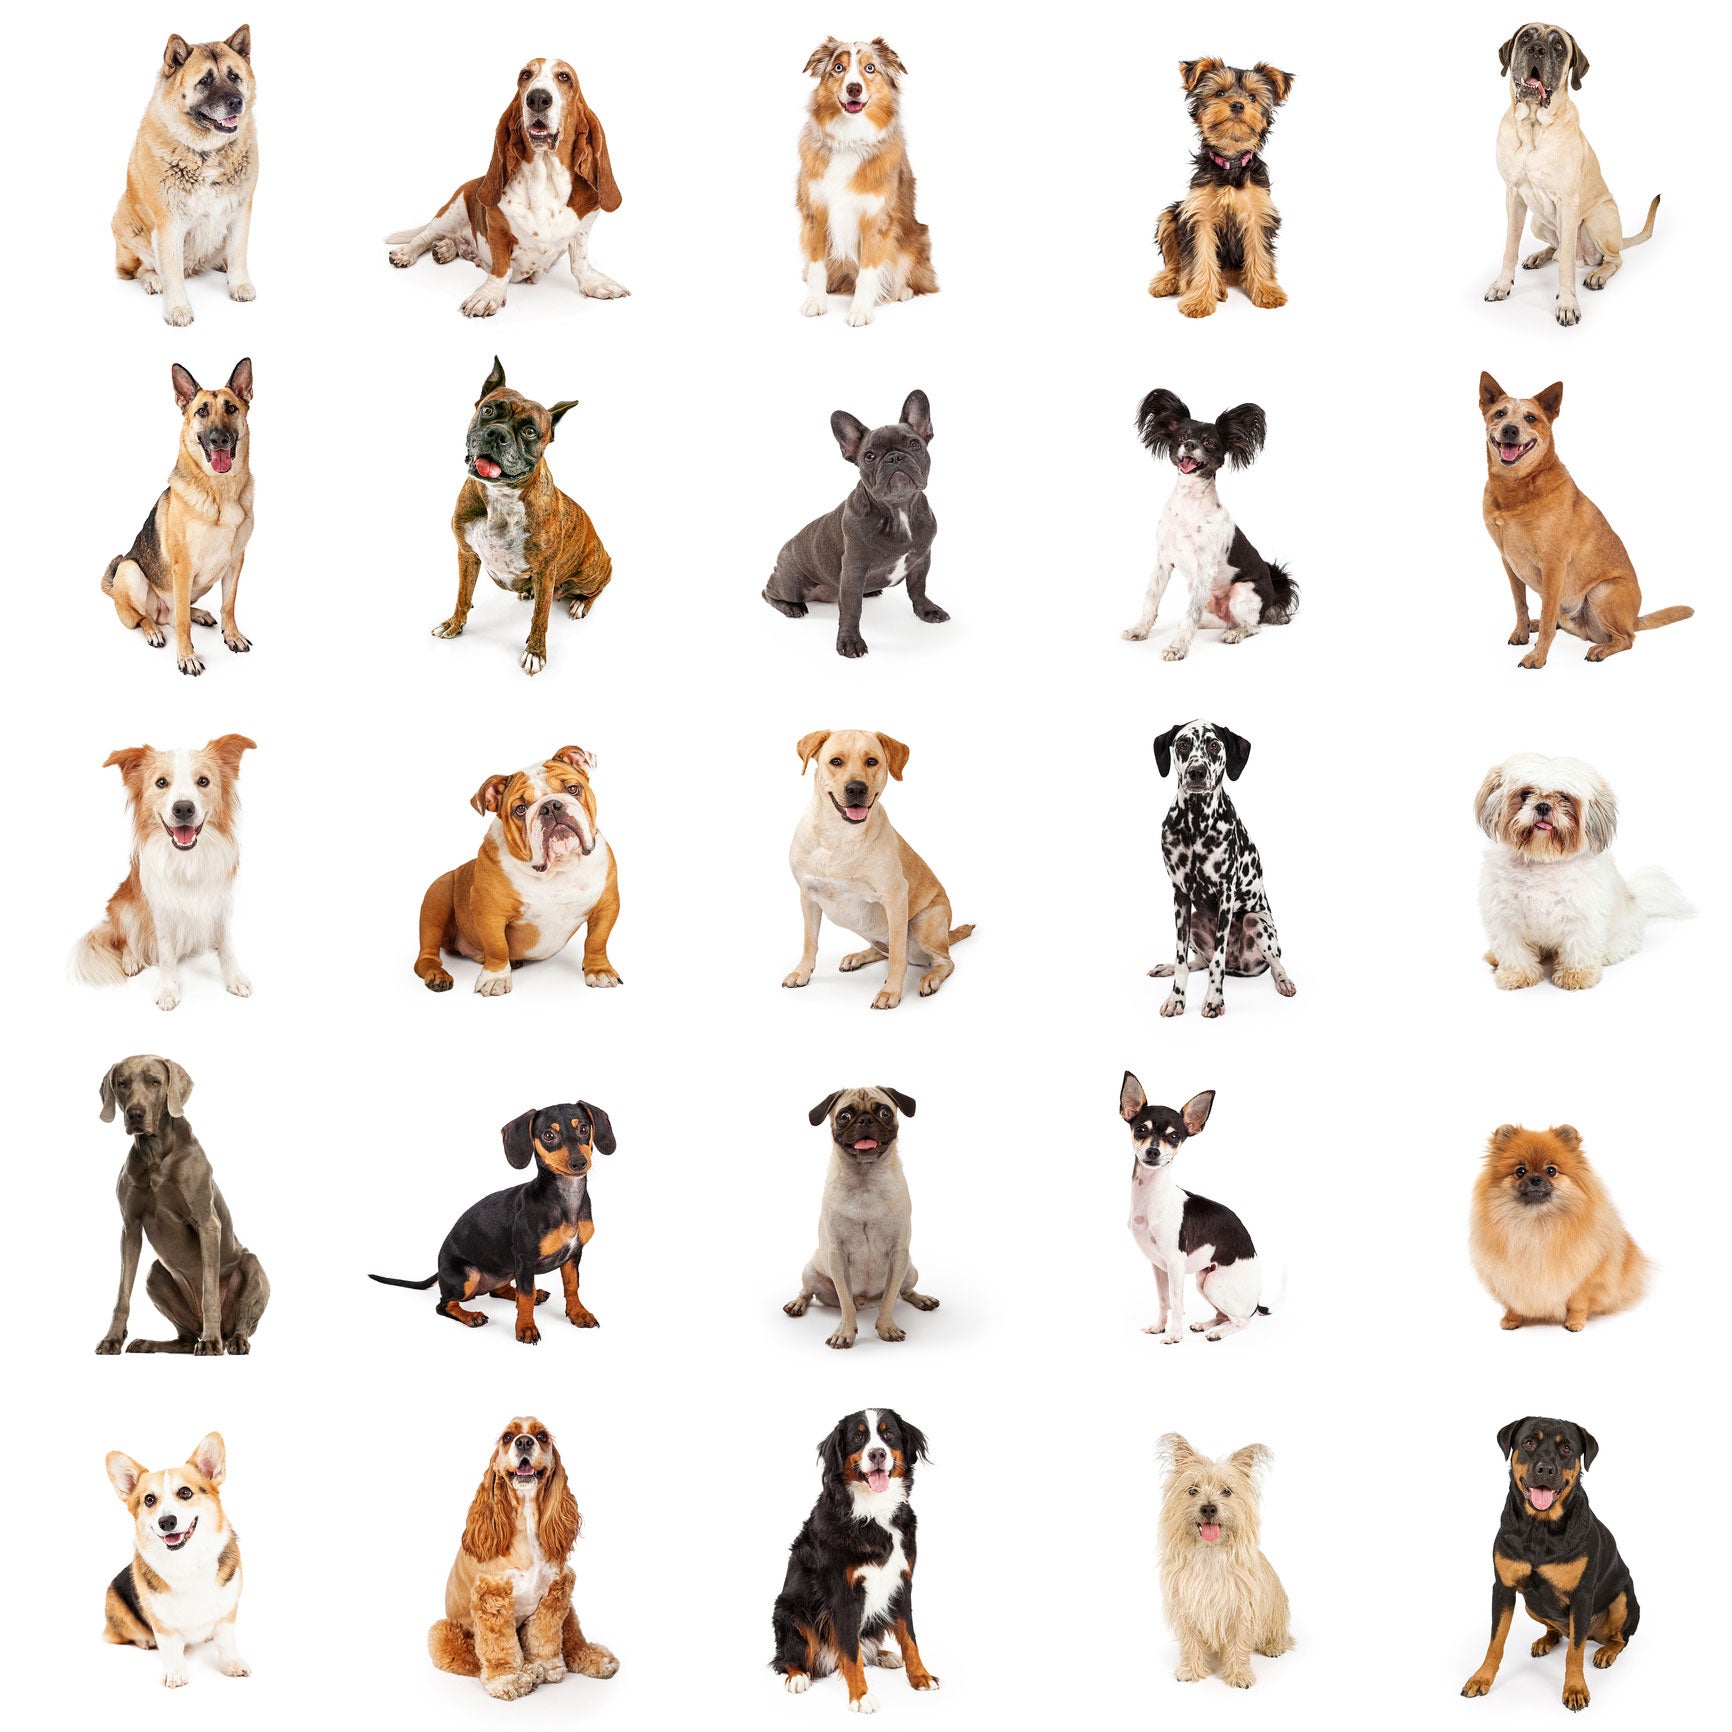 How Well Do You Know Dog Breeds?